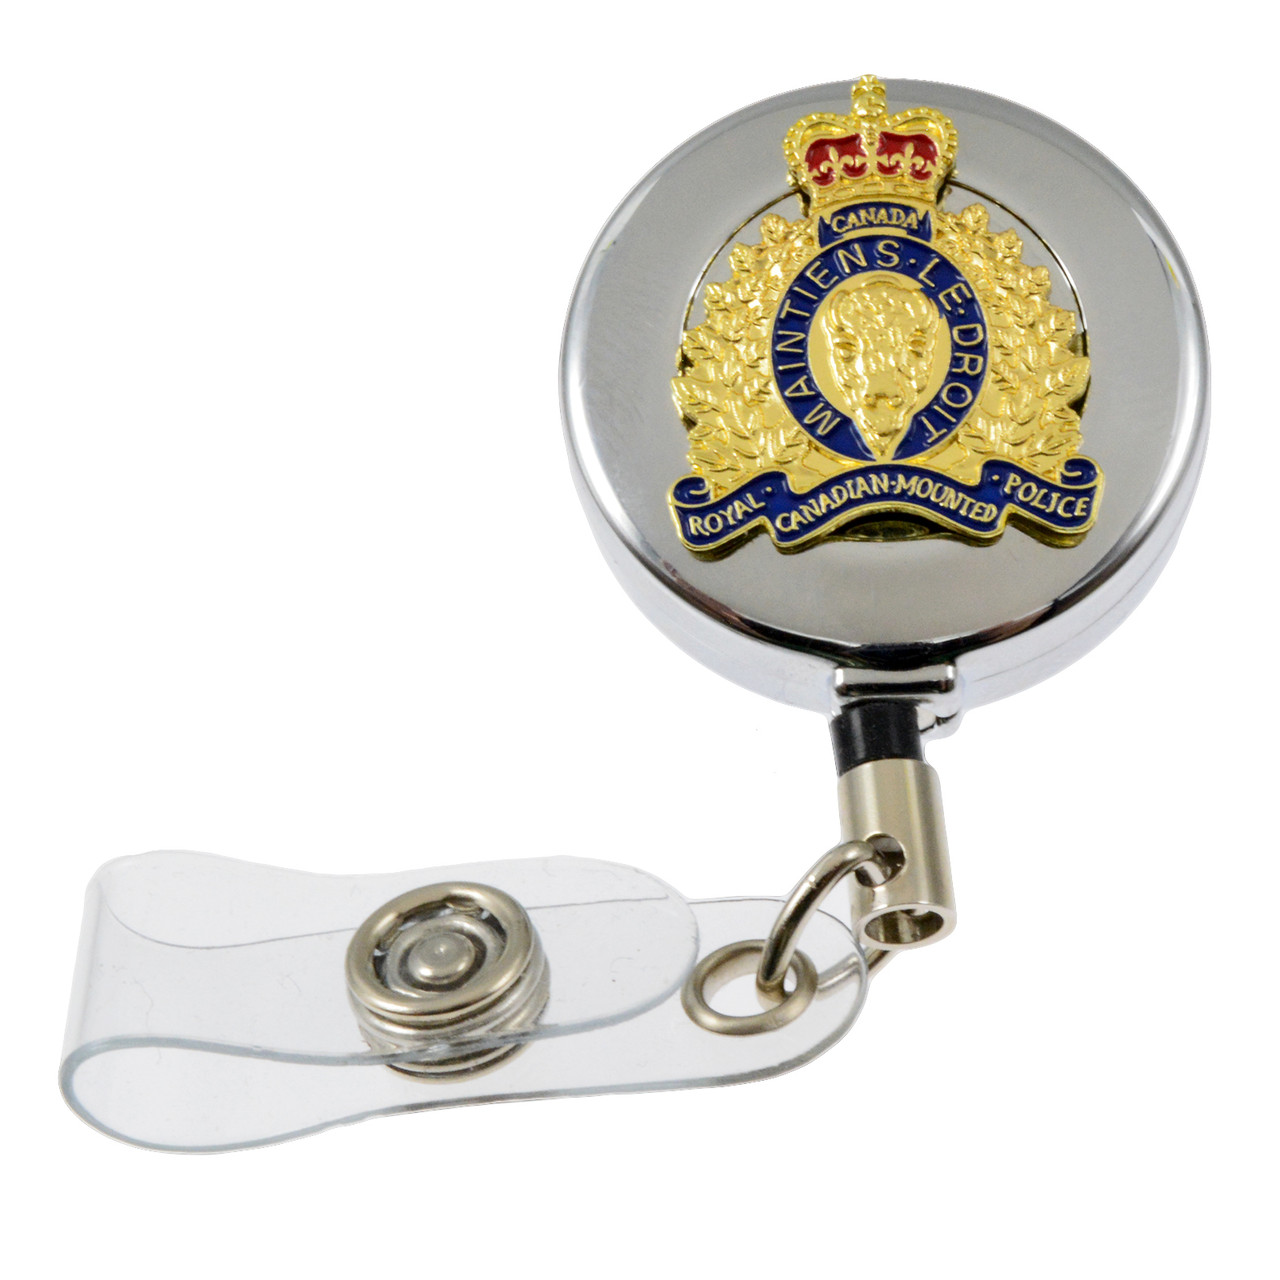 RCMP GRC Royal Canadian Mounted Police Crest Retractable Badge Reel (Gold)